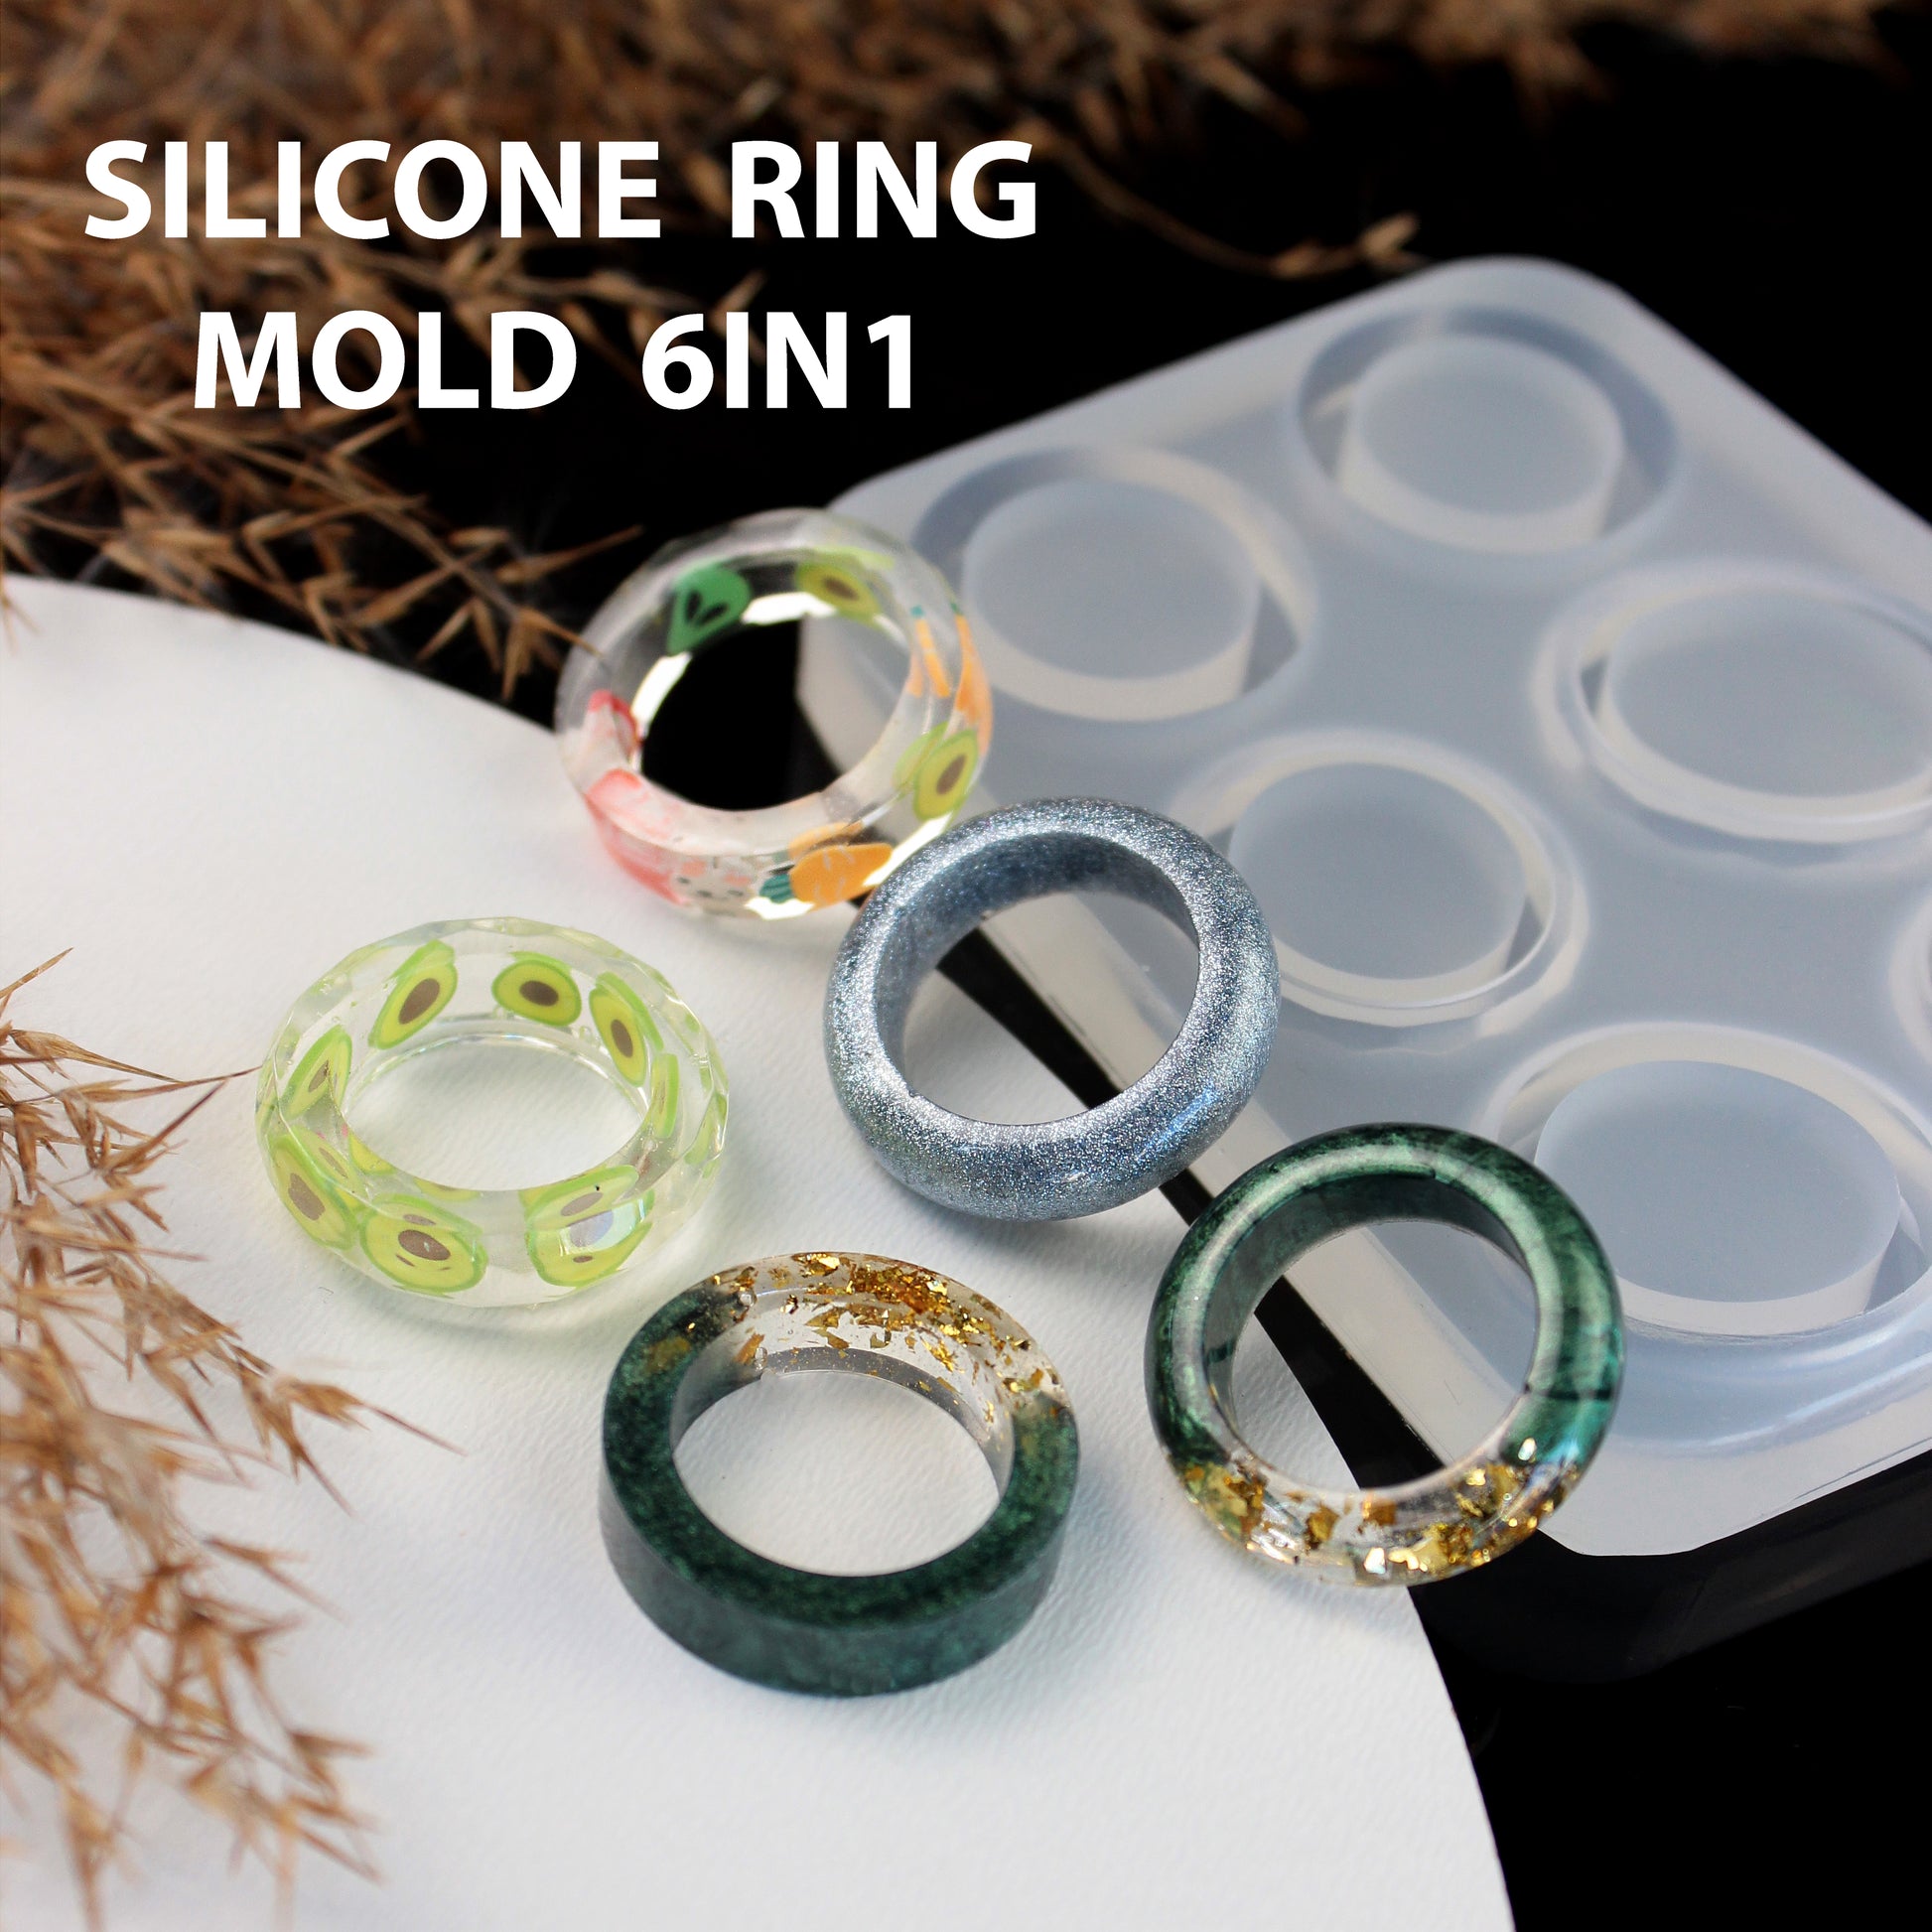 Silicone Ring Mold 6-in-1 for Epoxy Resin Crafts, Jewelry Making and D –